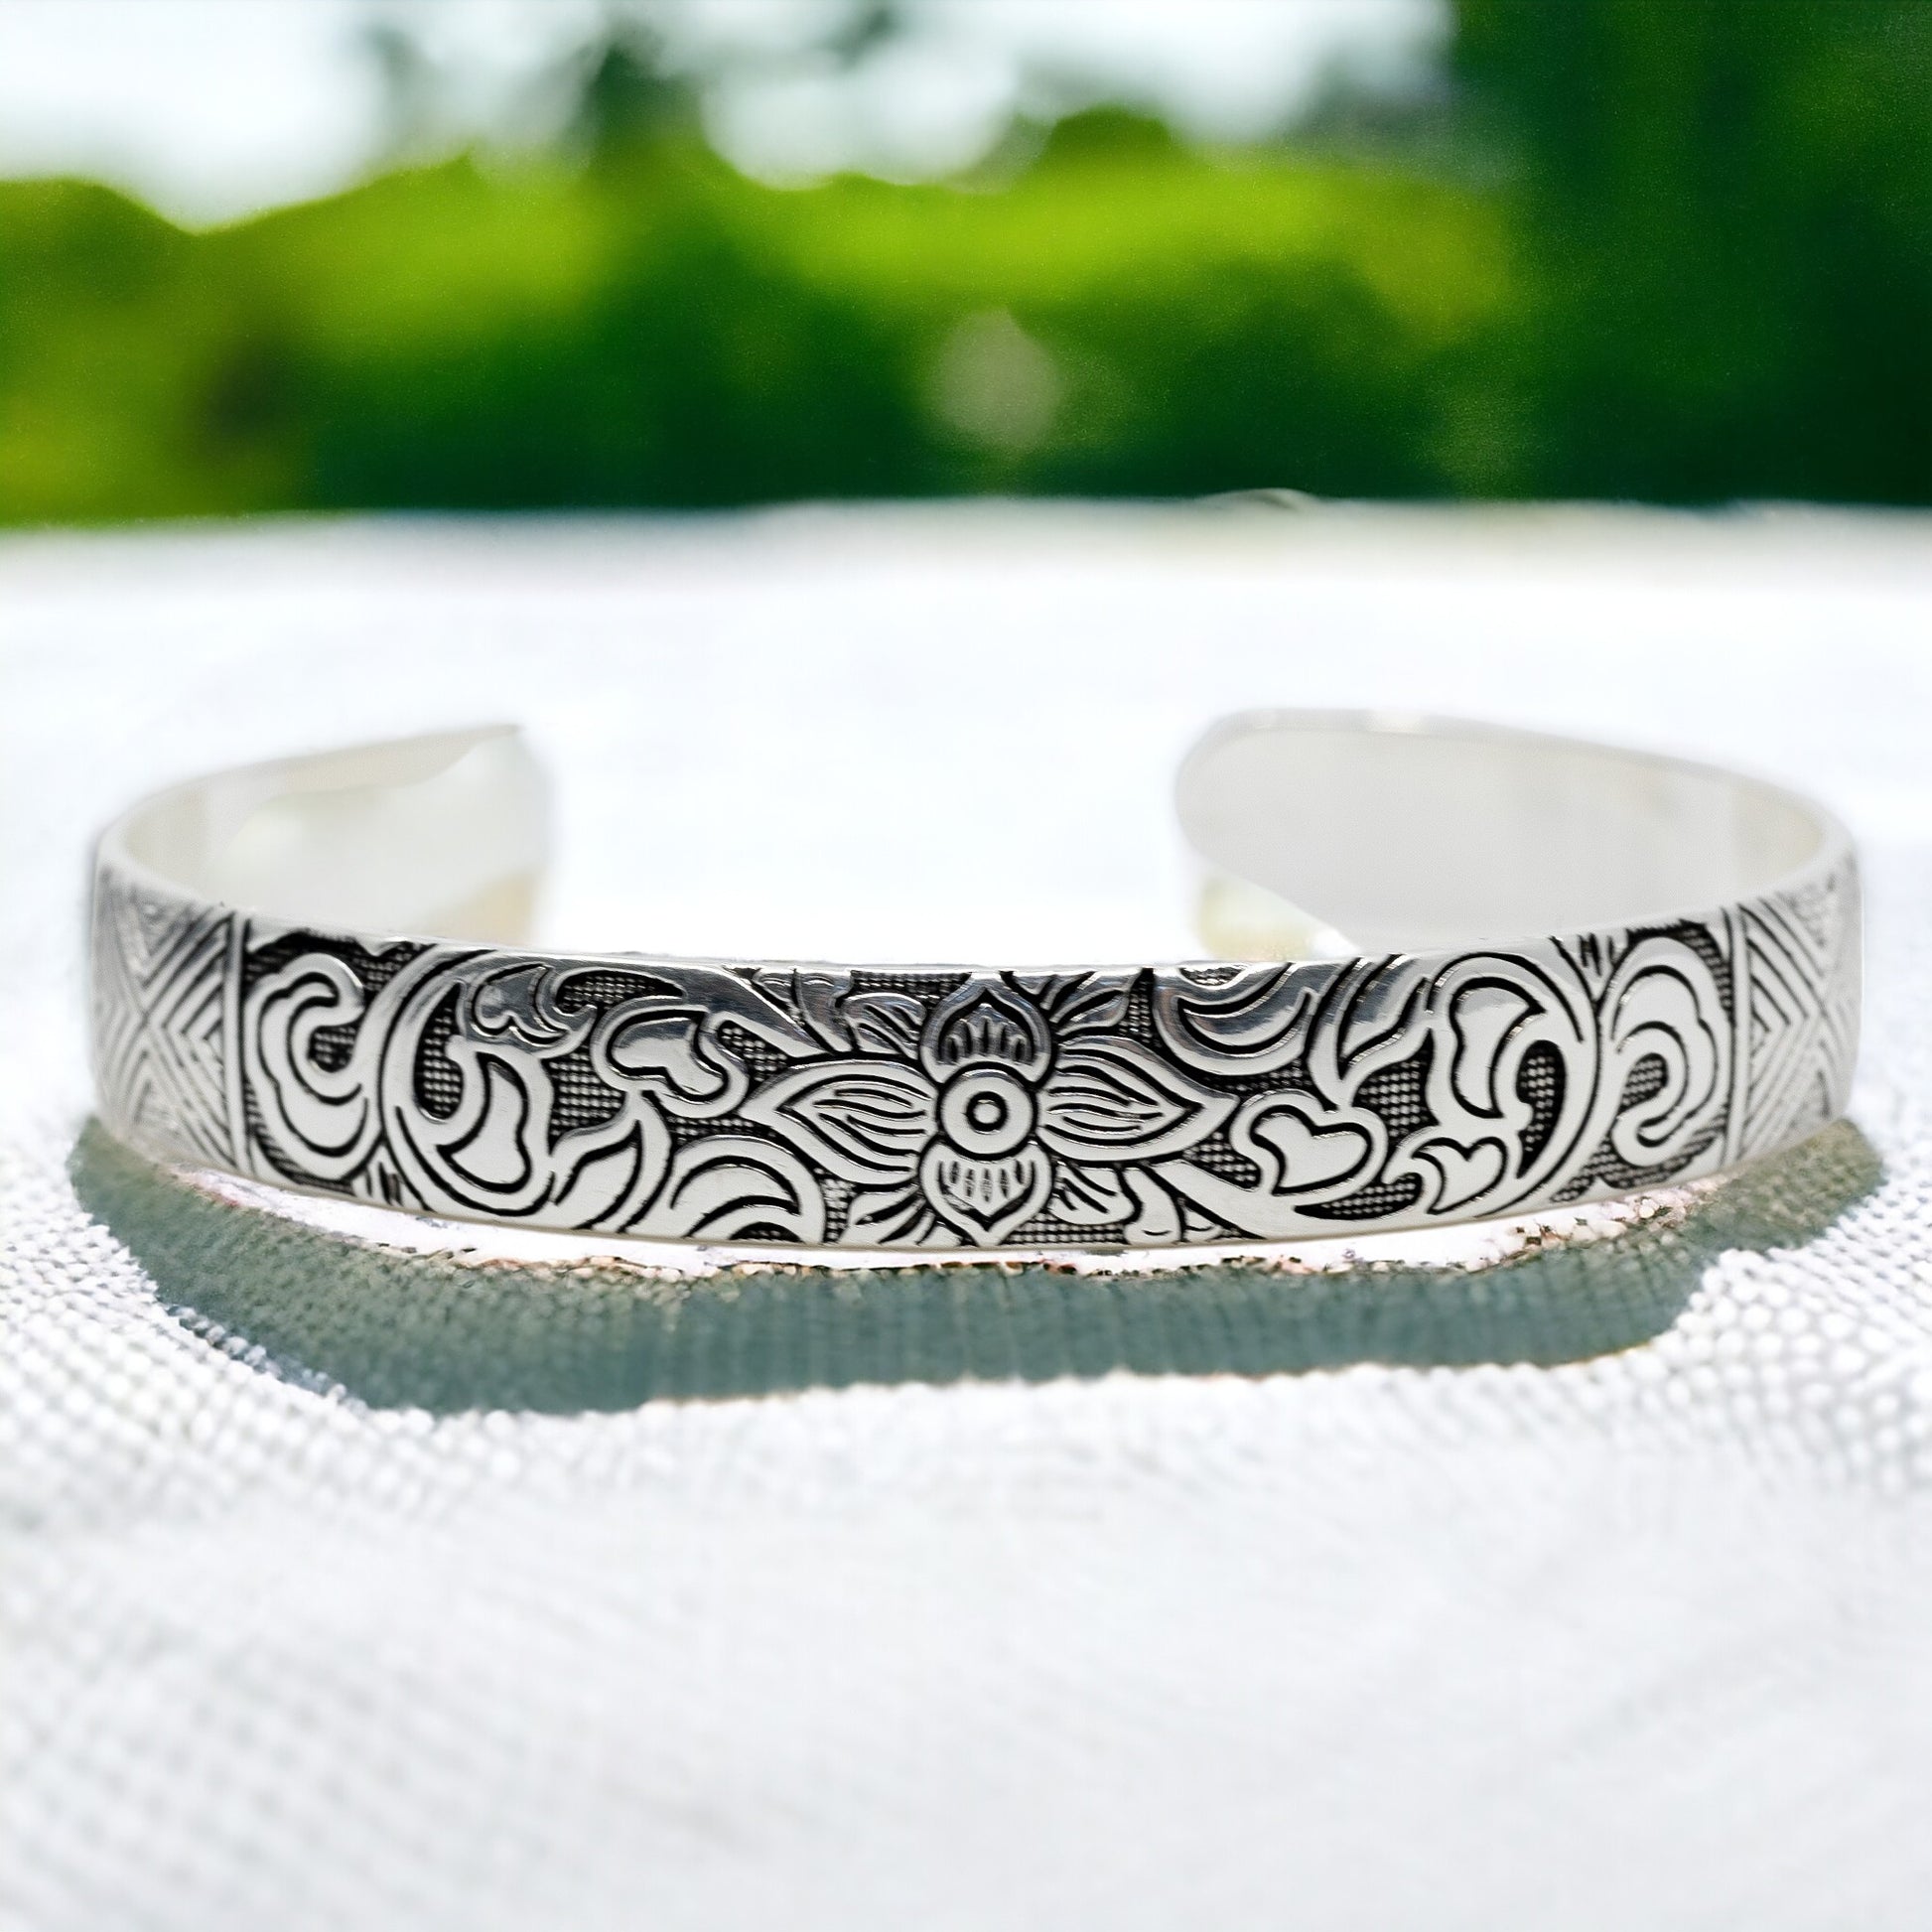 Silver Lotus Bangle for Wife - To My Beautiful Wife Gift For Anniversary, Birthday